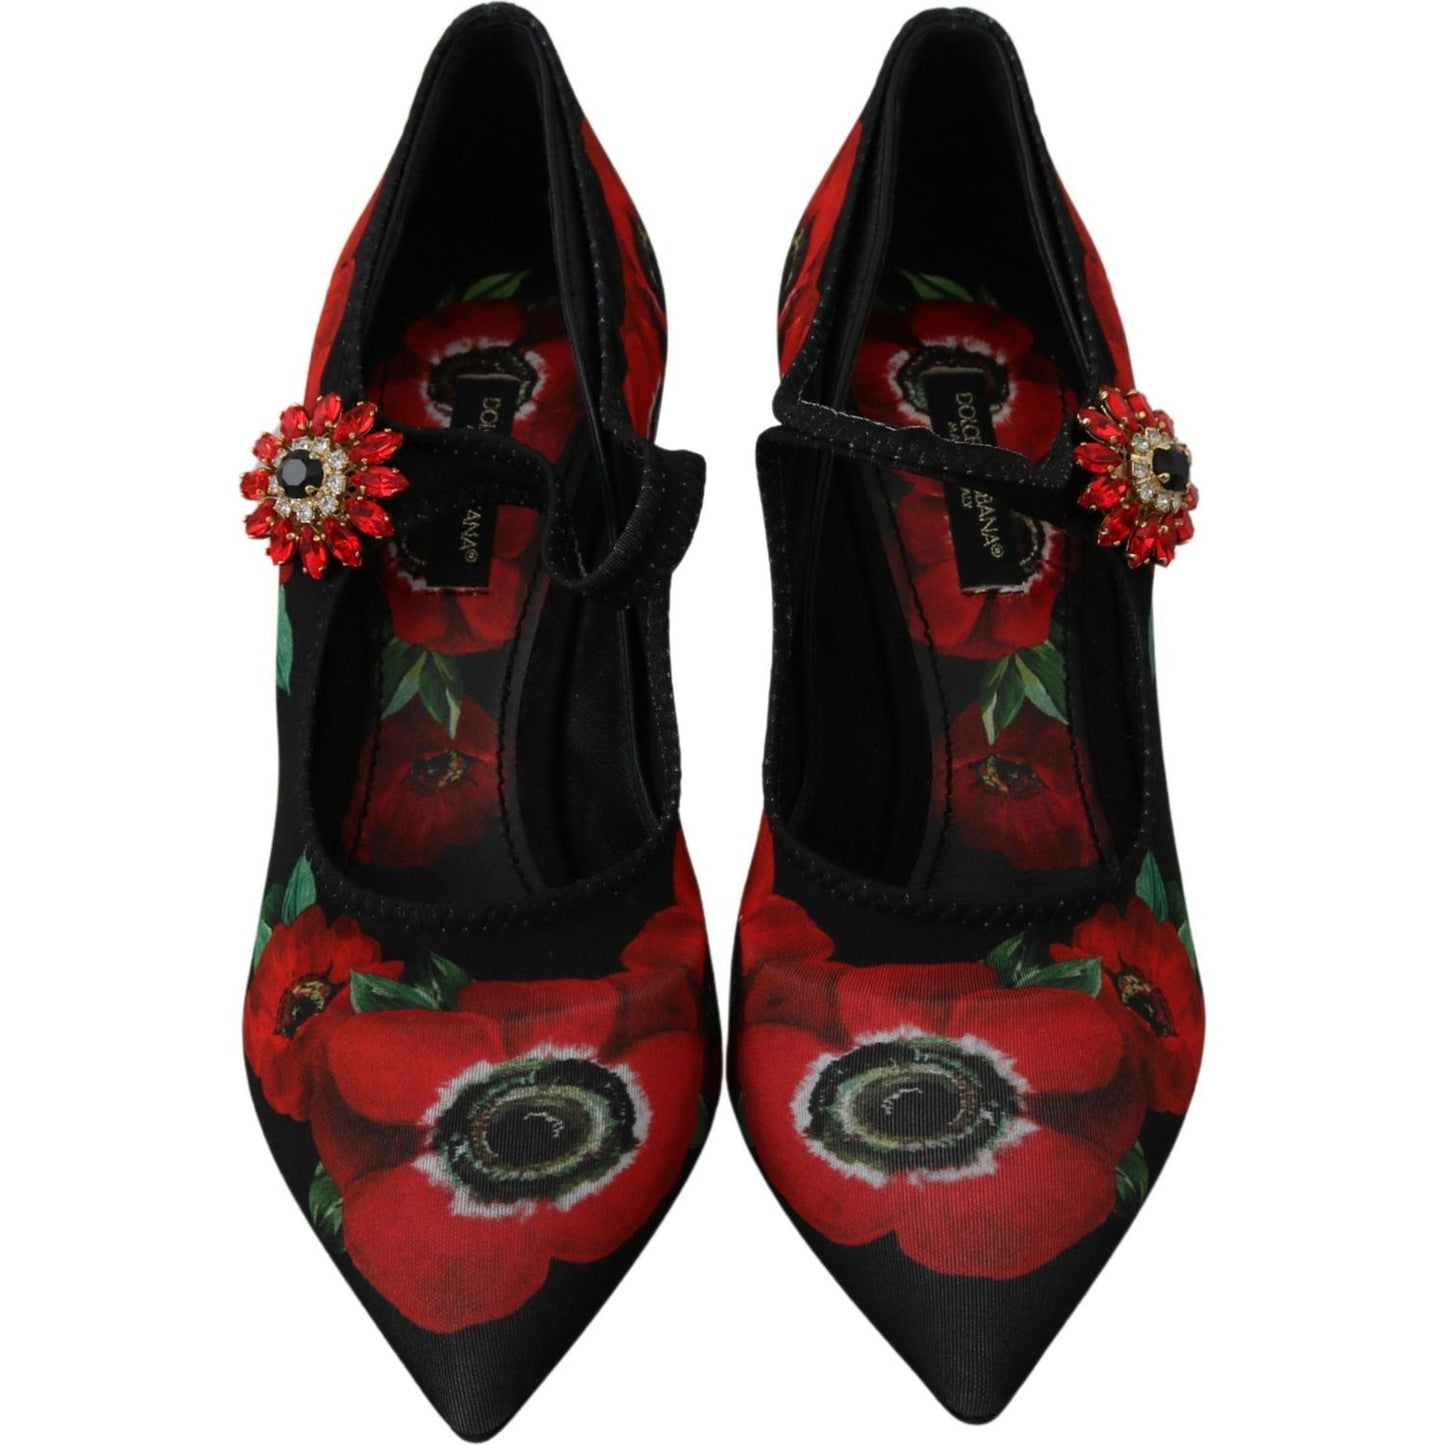 Dolce & Gabbana Floral Mary Janes Pumps with Crystal Detail black-red-floral-mary-janes-pumps-shoes Shoes IMG_0225-scaled-c7b6a40d-062.jpg